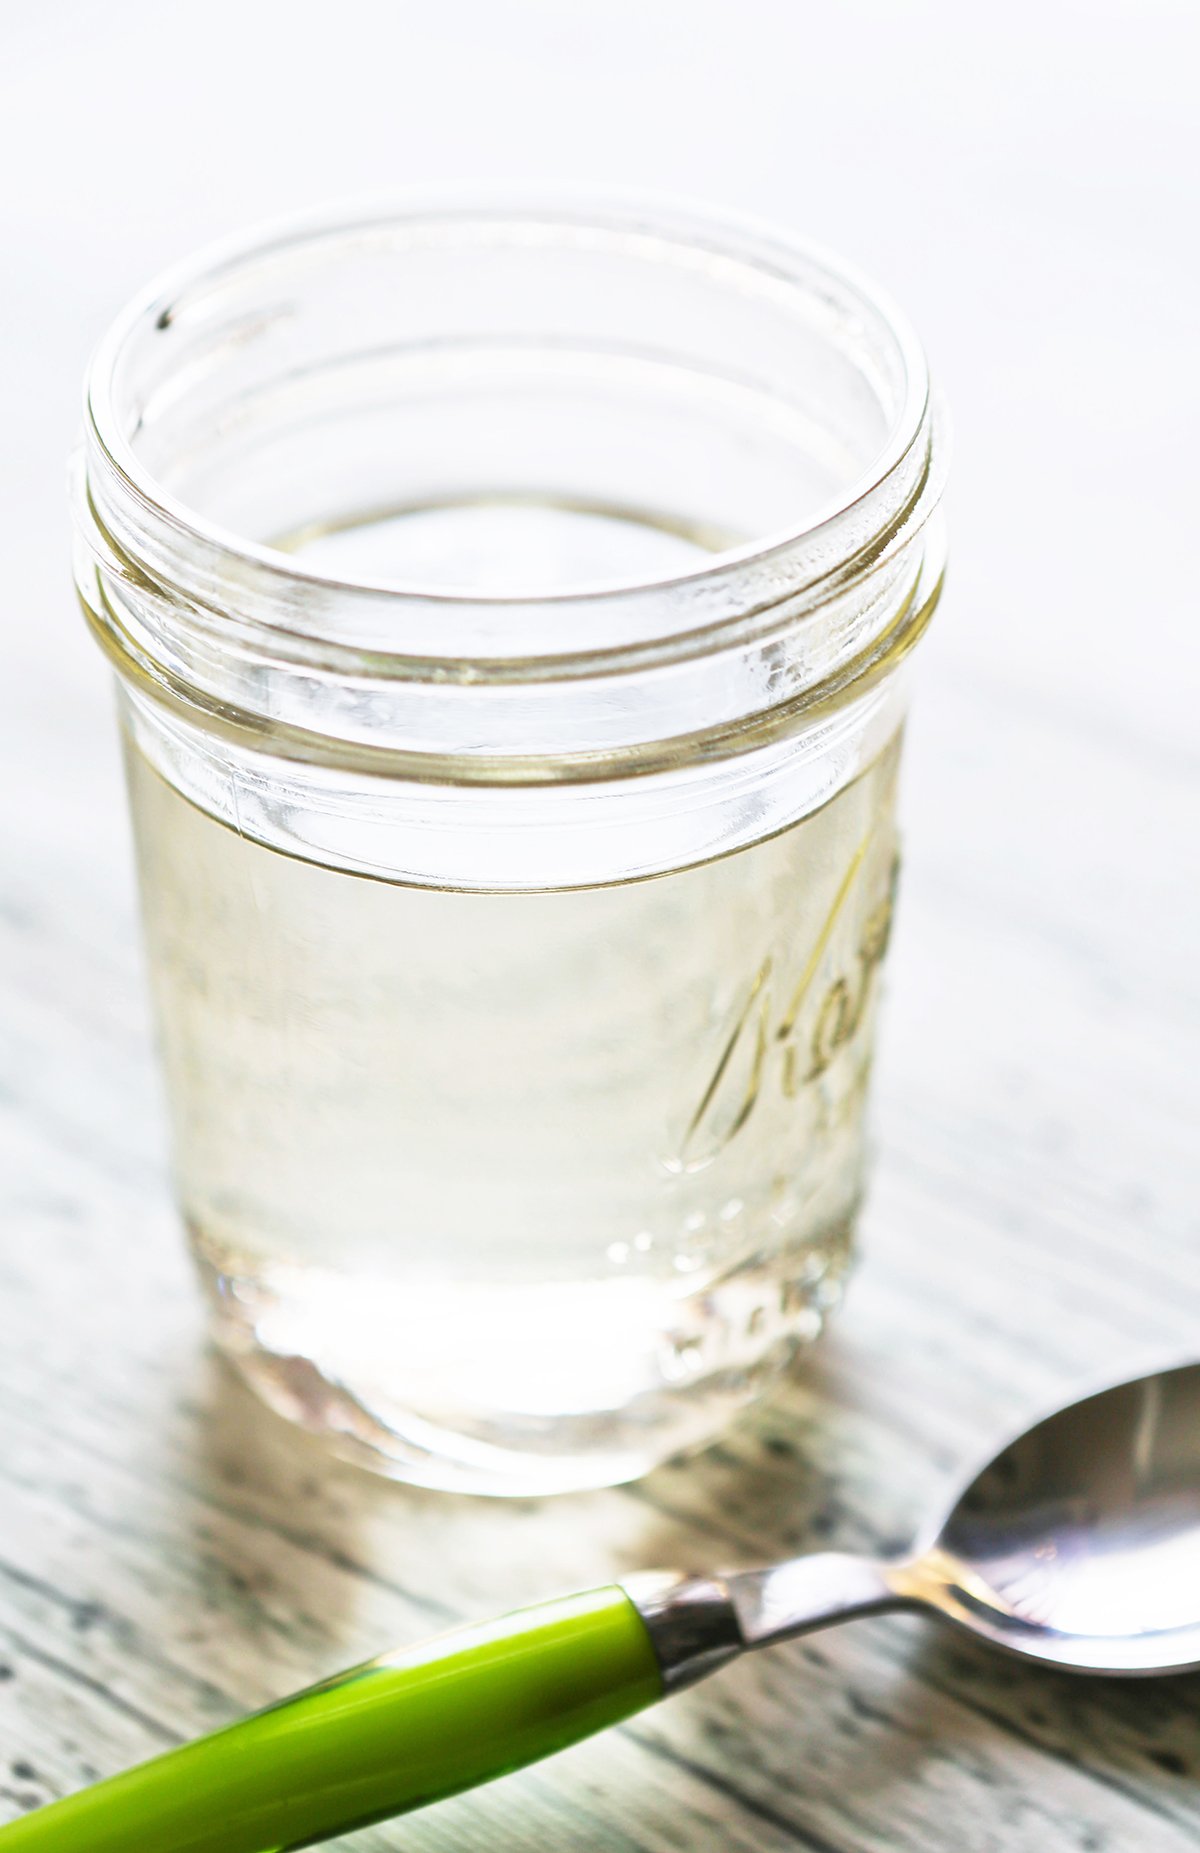 Mason jar filled with clear liquid, sitting on a counter next to a spoon.